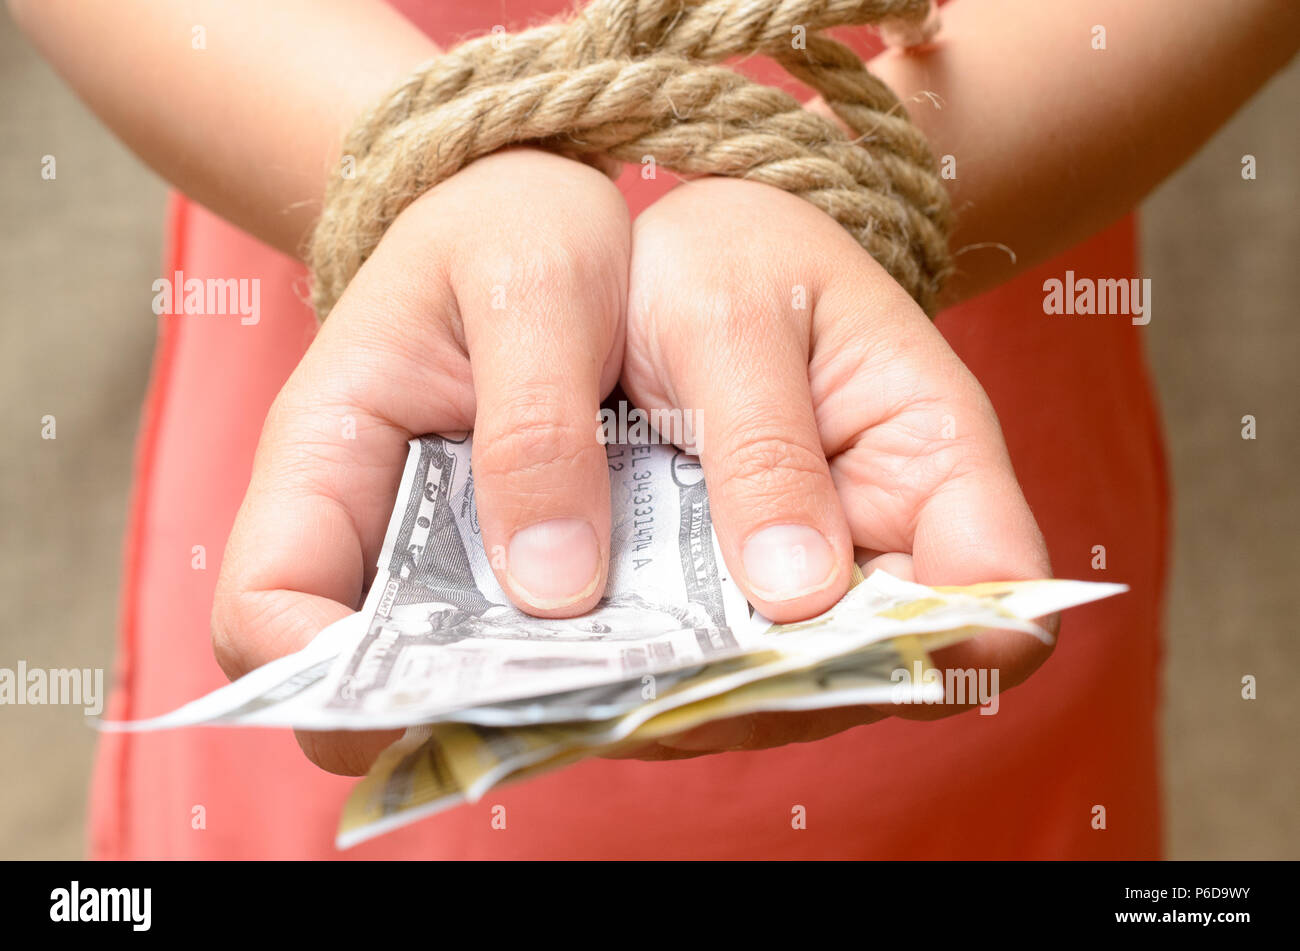 Women's hands tied with a rope and holding money. Credit bondage. Stock Photo